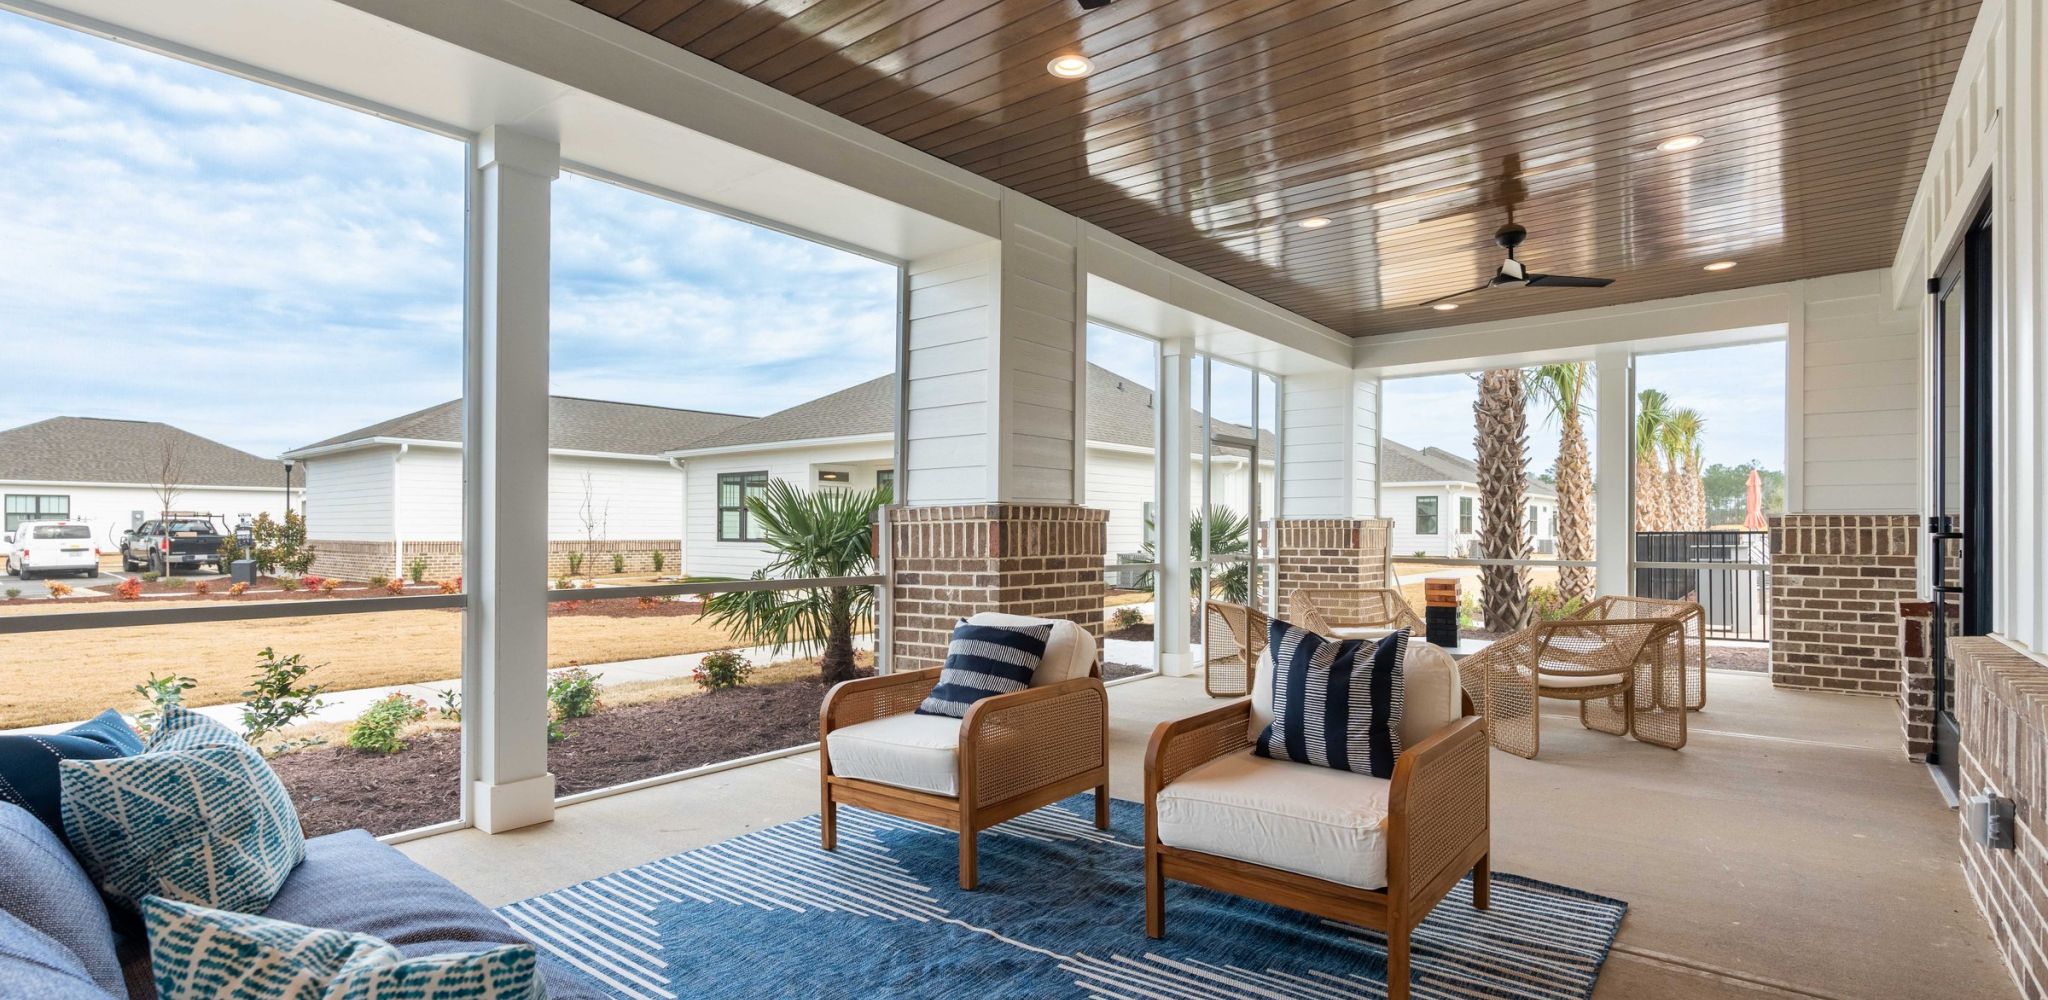 Hawthorne Cottages at Leland outdoor resident amenity area with covered ceiling and comfortable seating